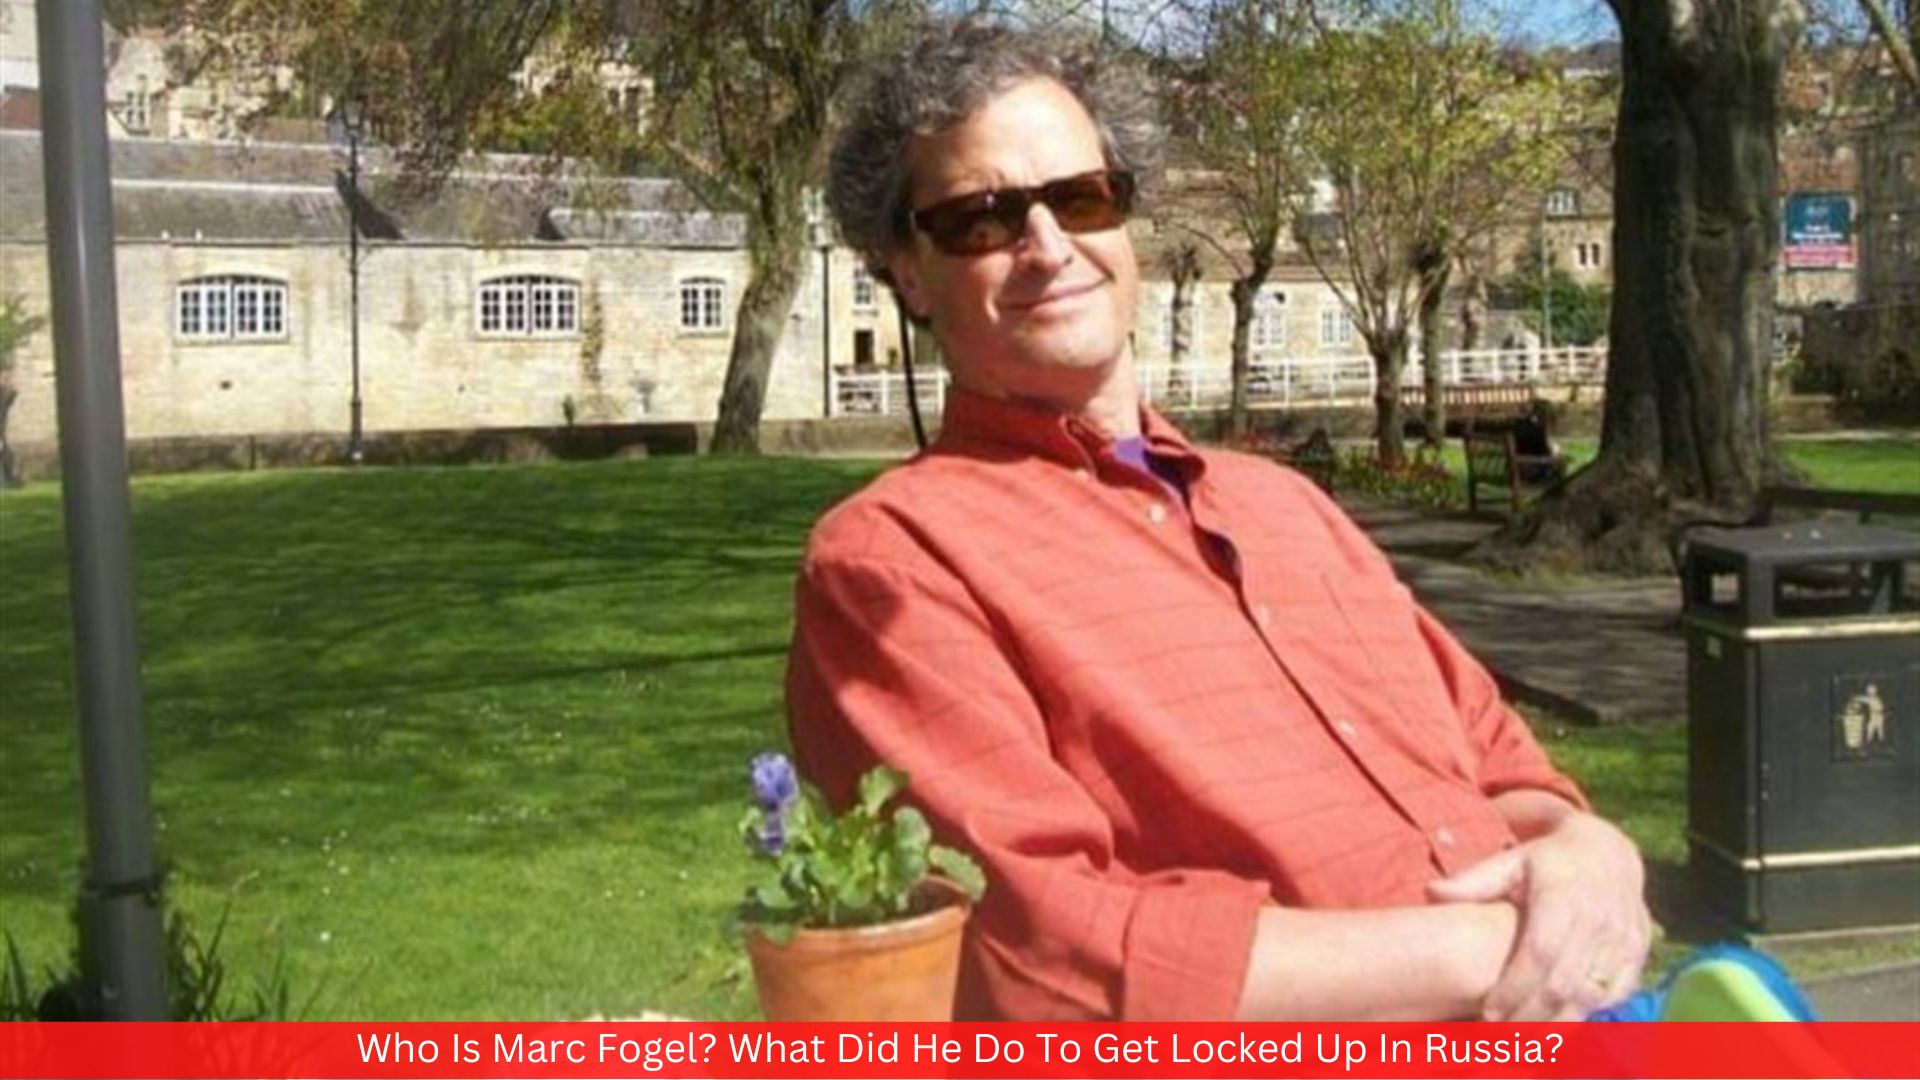 Who Is Marc Fogel? What Did He Do To Get Locked Up In Russia?